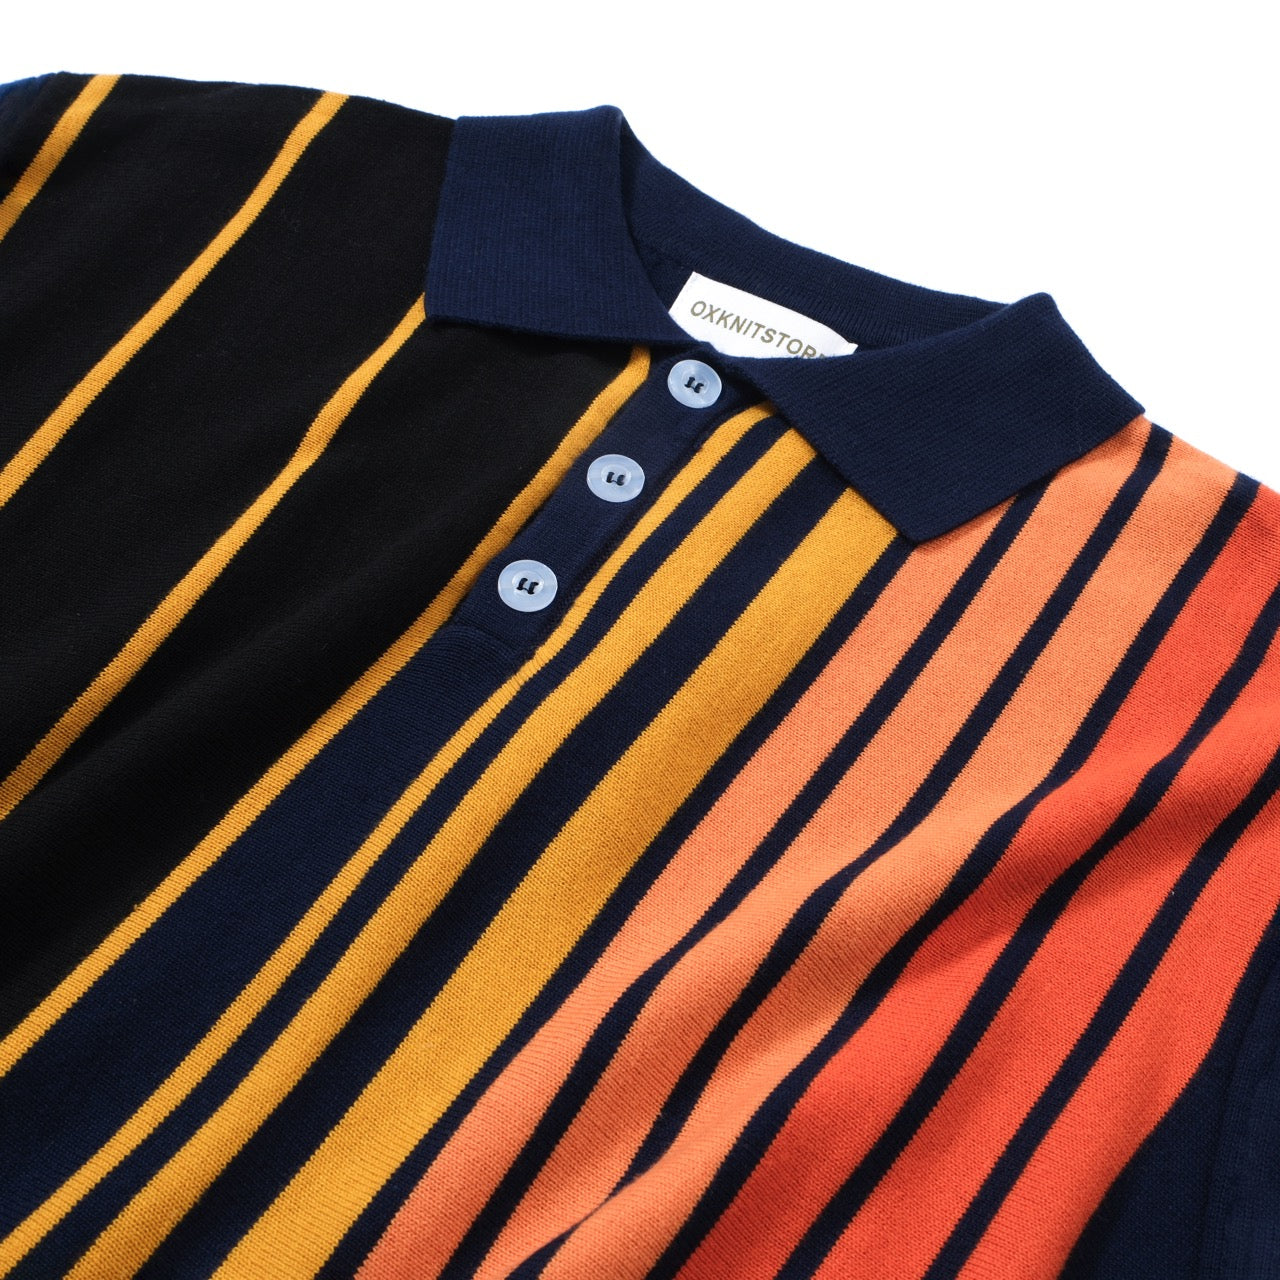 OXKNIT Men Vintage Clothing 1960s Mod Style Casual Rainbow Vertical stripes Black Polo Knitted Retro Wear